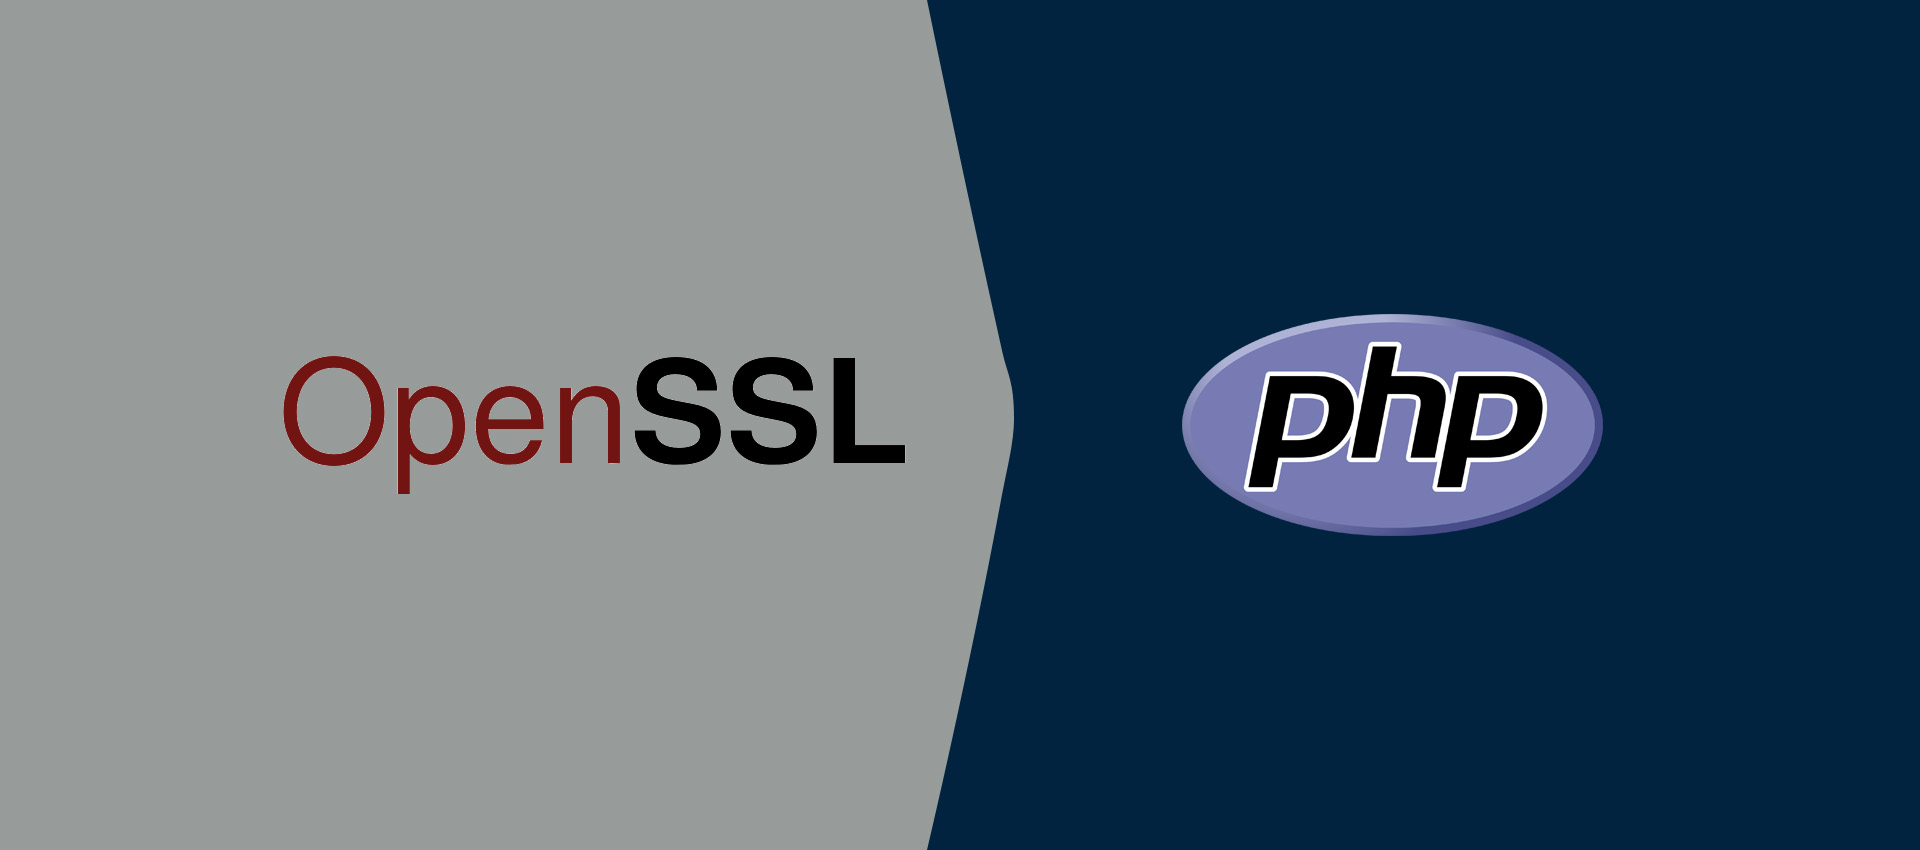 How To Configure PHP OpenSSL Module On Windows